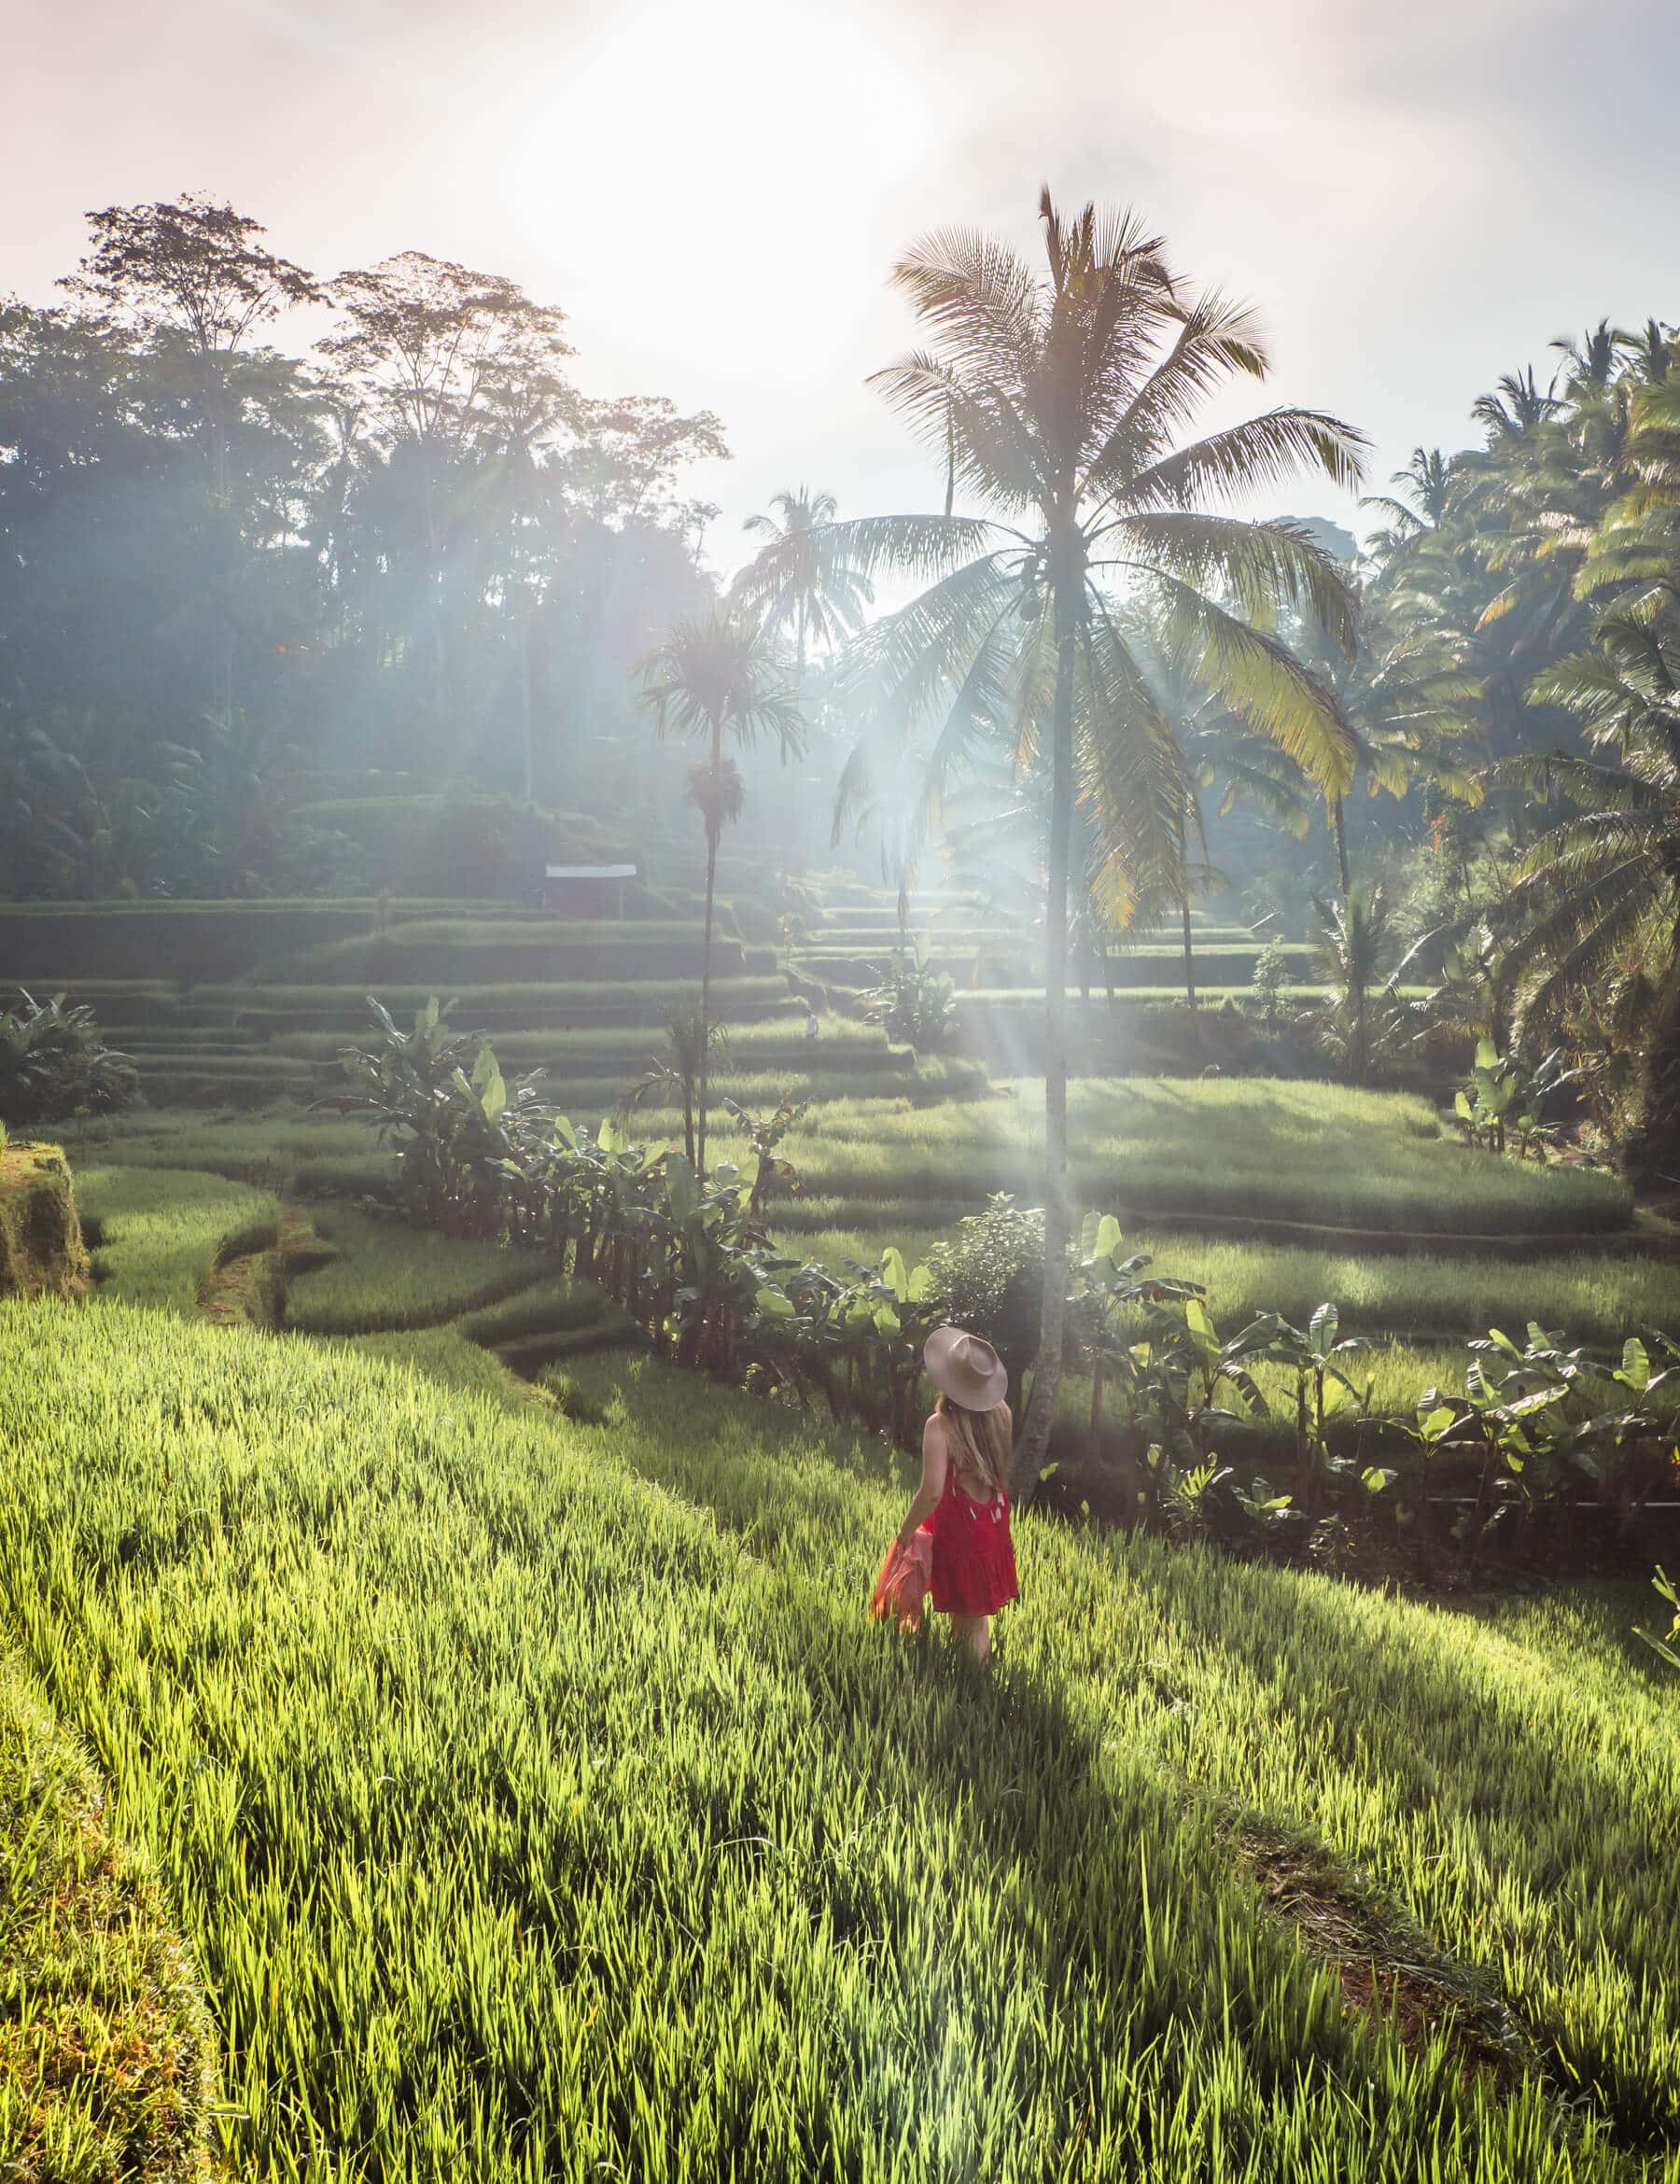 Girl in a red dress walking in Tegalalang Rice Terraces during sunset - Indonesia vs. Thailand